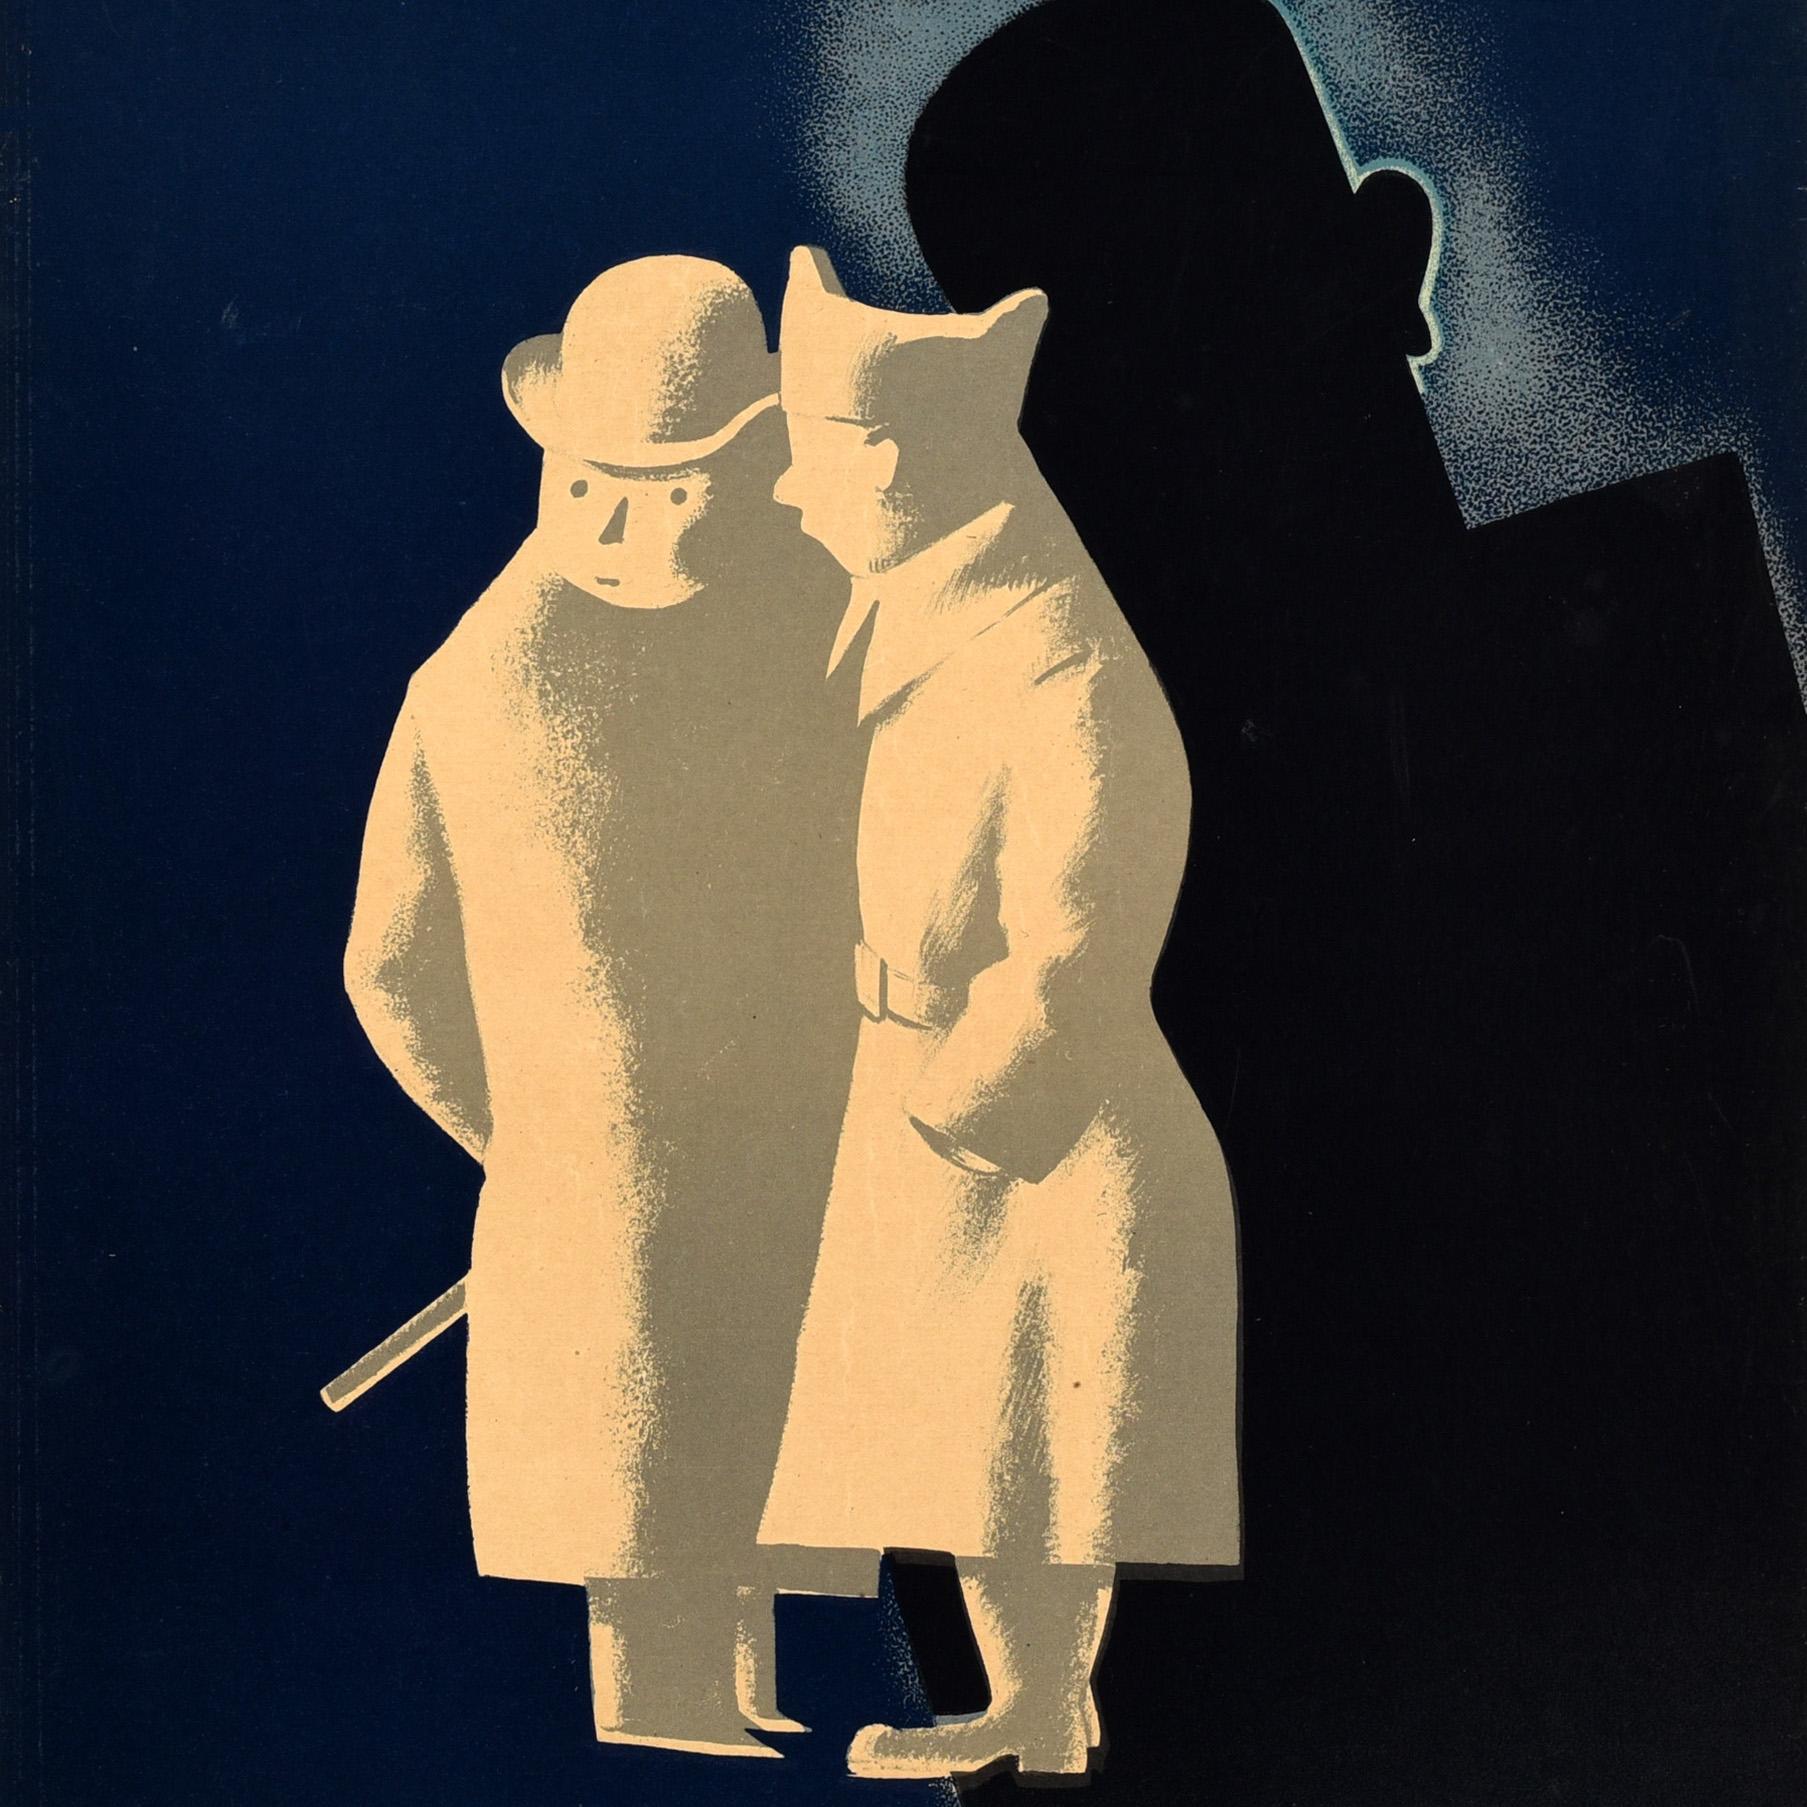 Original vintage World War Two poster Silence - The Enemy is Watching for your confidences / Silence, l'Ennemi guette vos confidences - Design by Paul Colin (1892-1985) features two men whispering to each other with a looming dark shadow listening